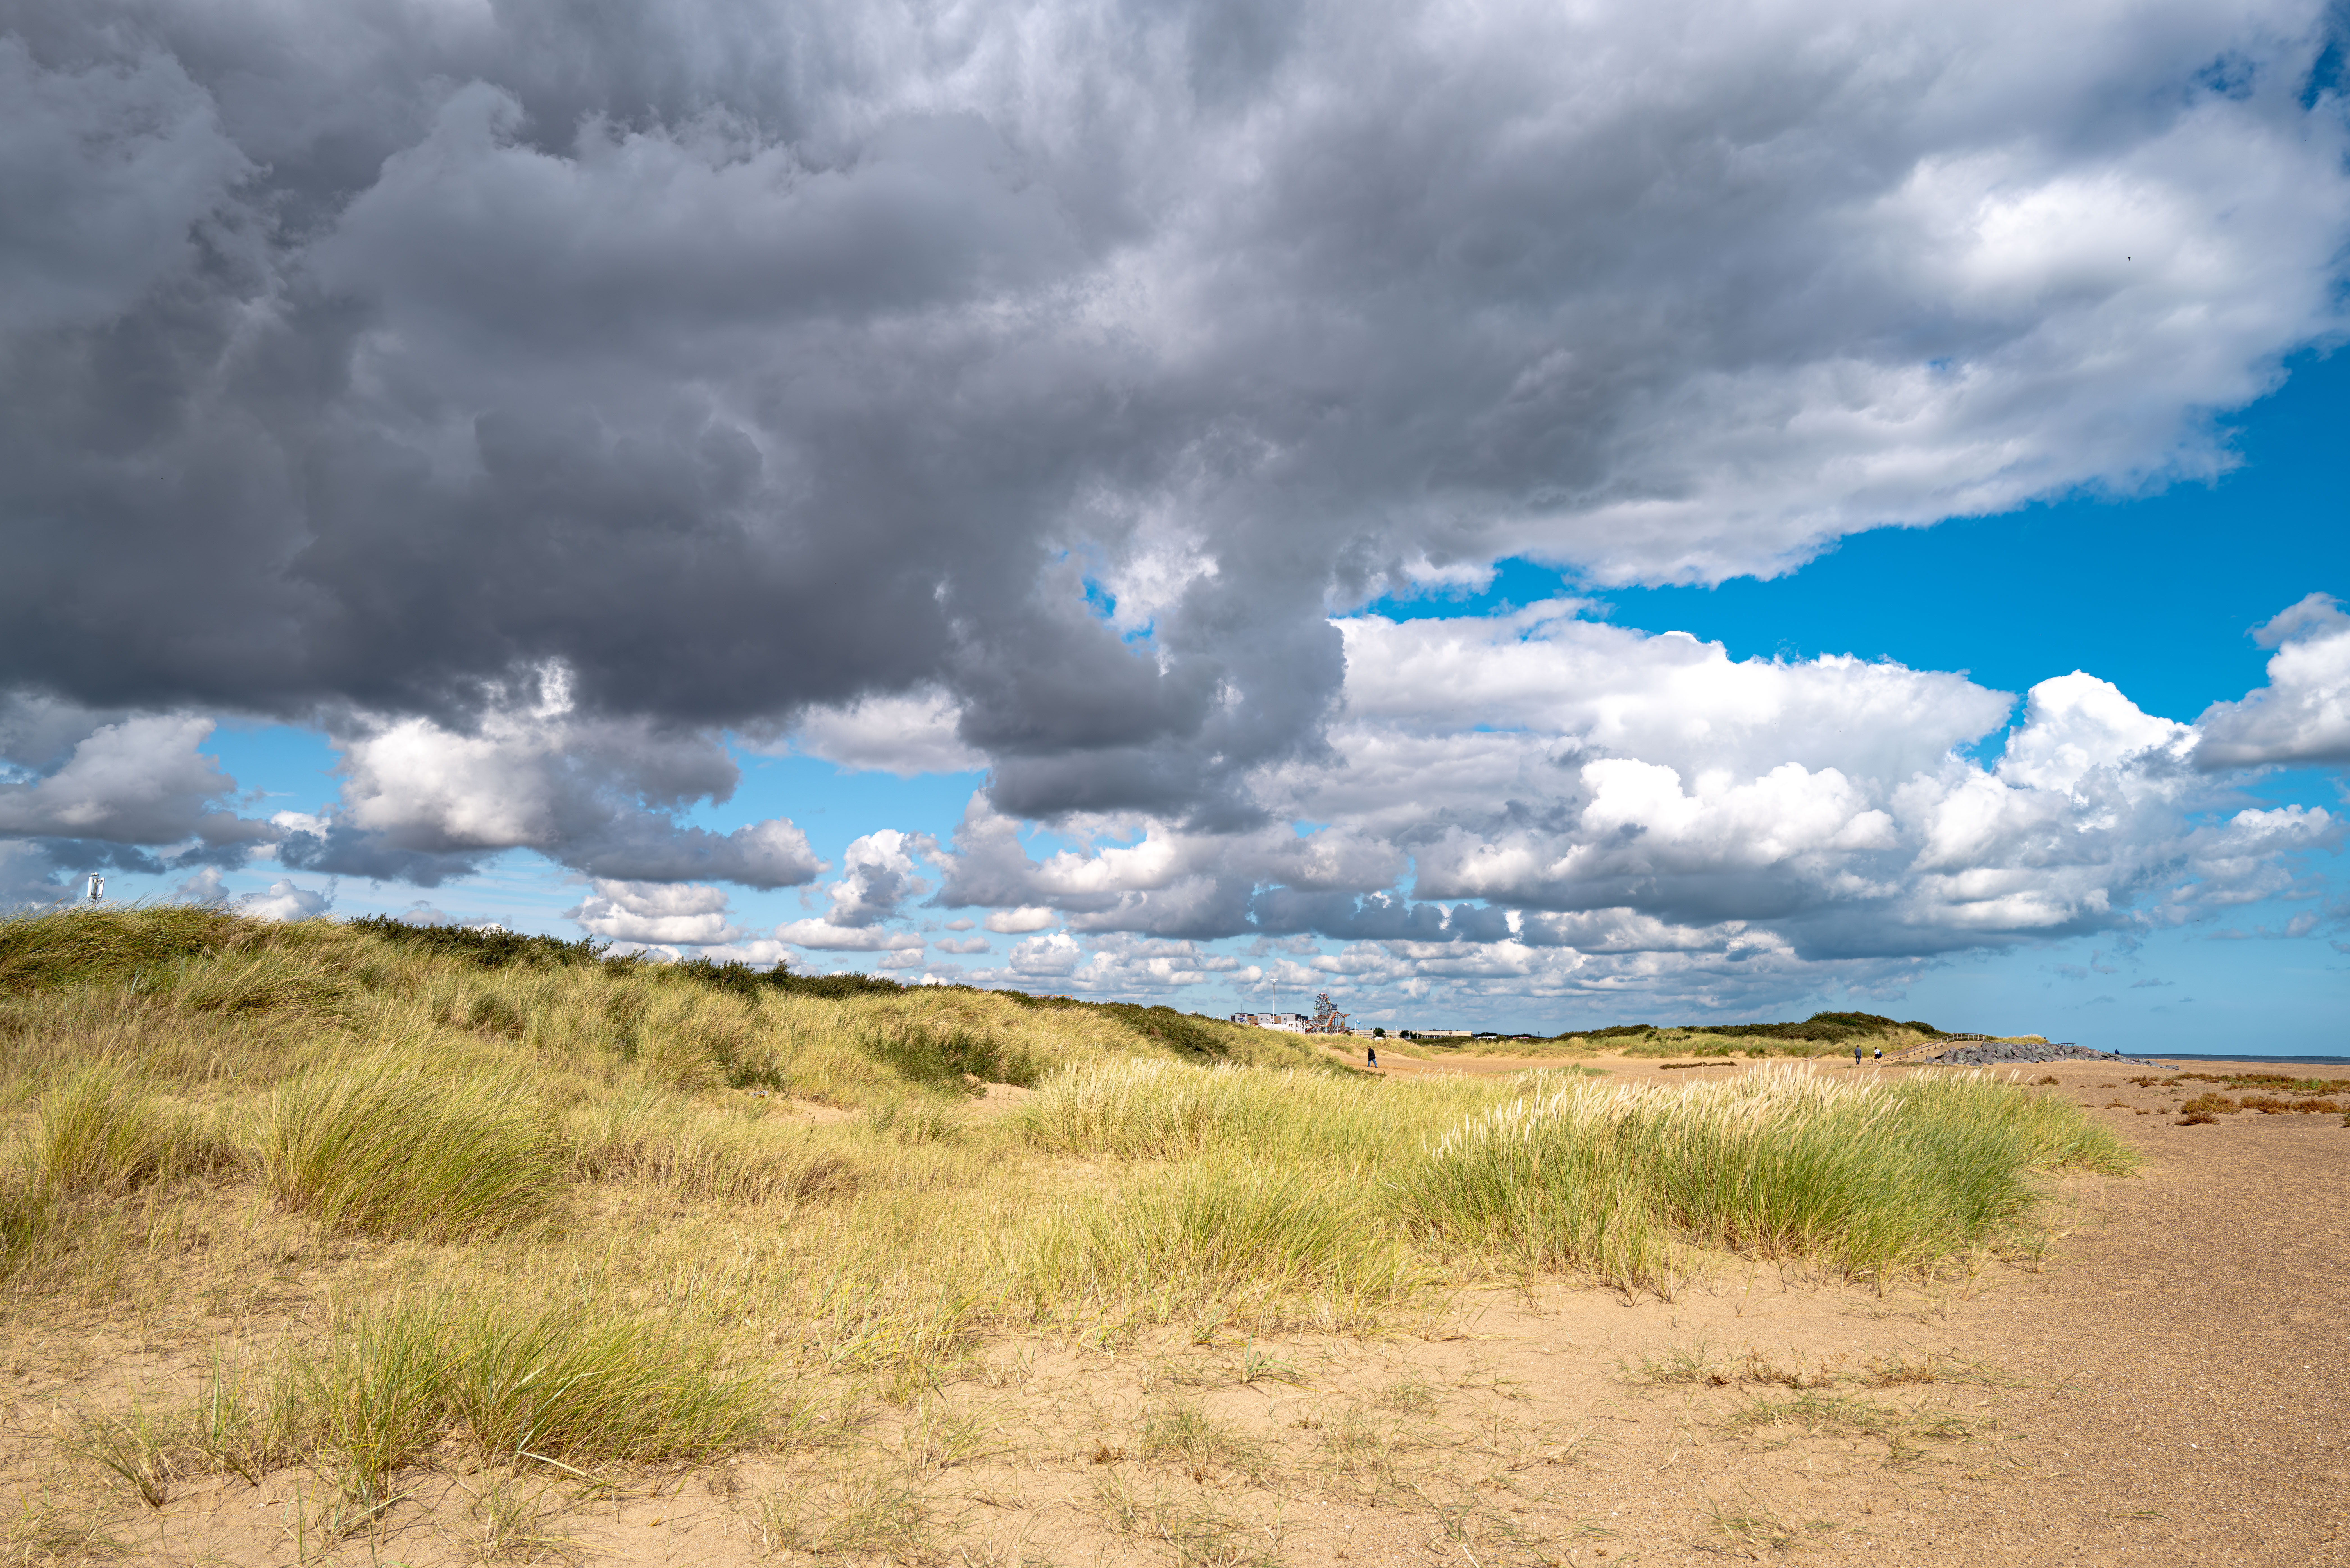 The storm is approaching over Skegness Lincolnshire Dunes